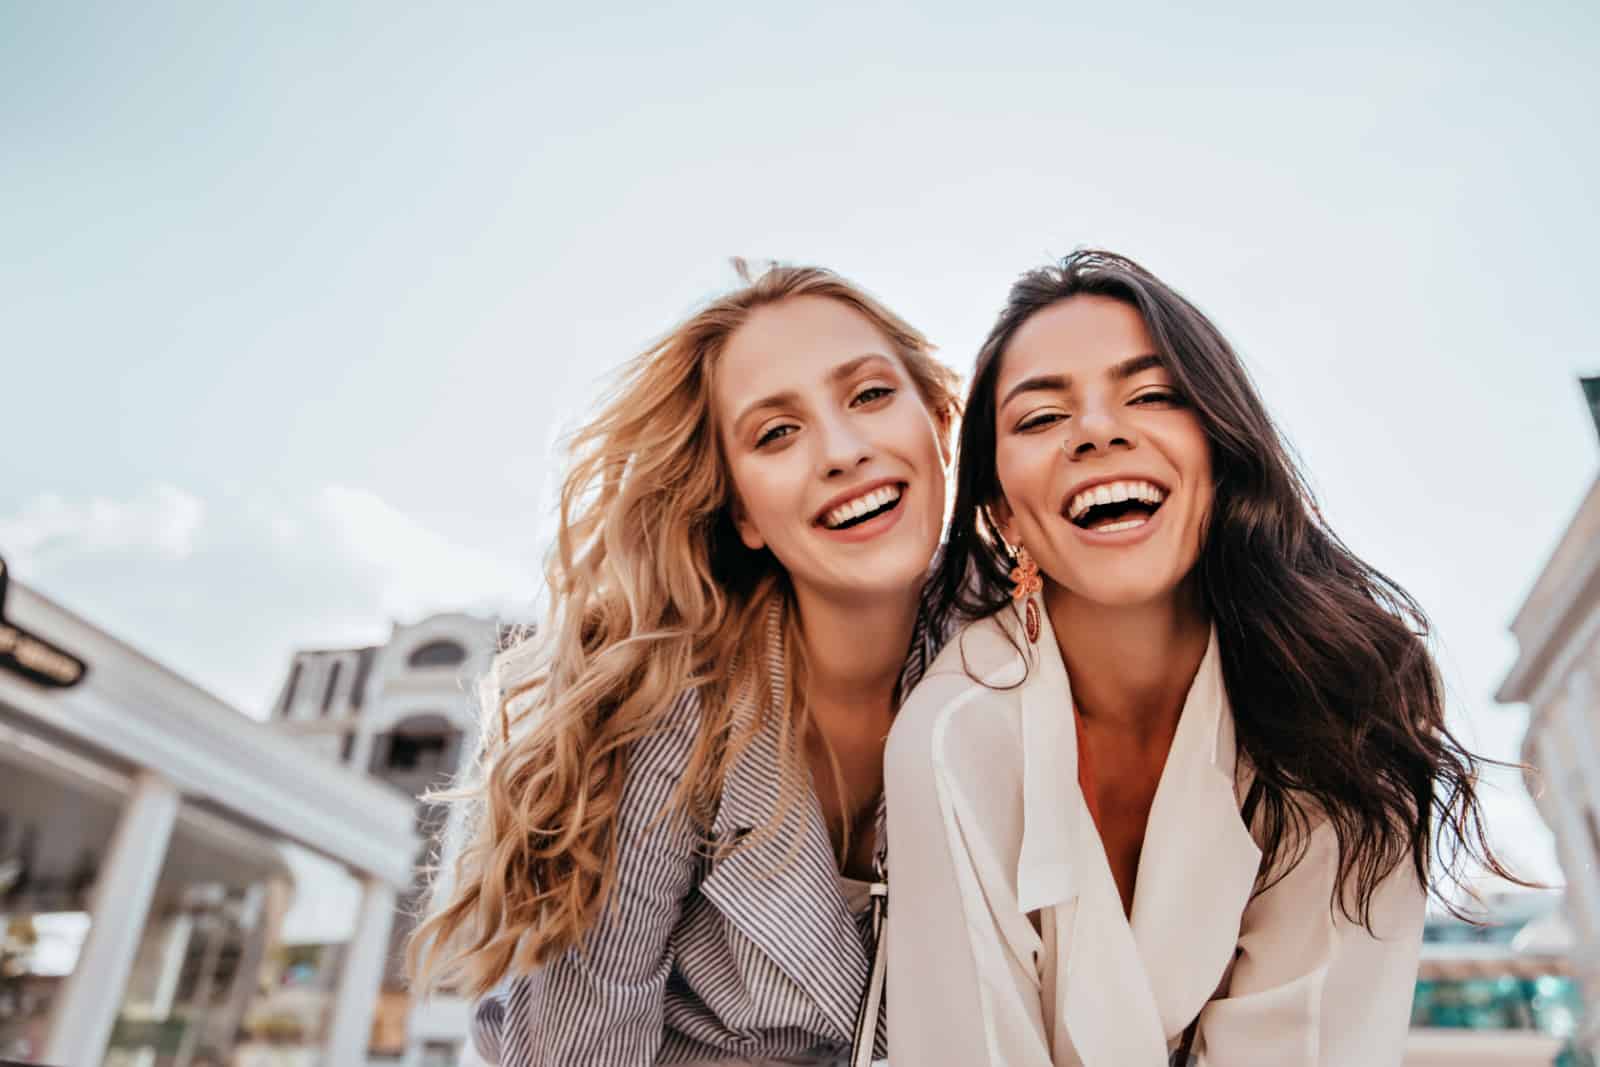 Inspired laughing ladies posing together on sky background.